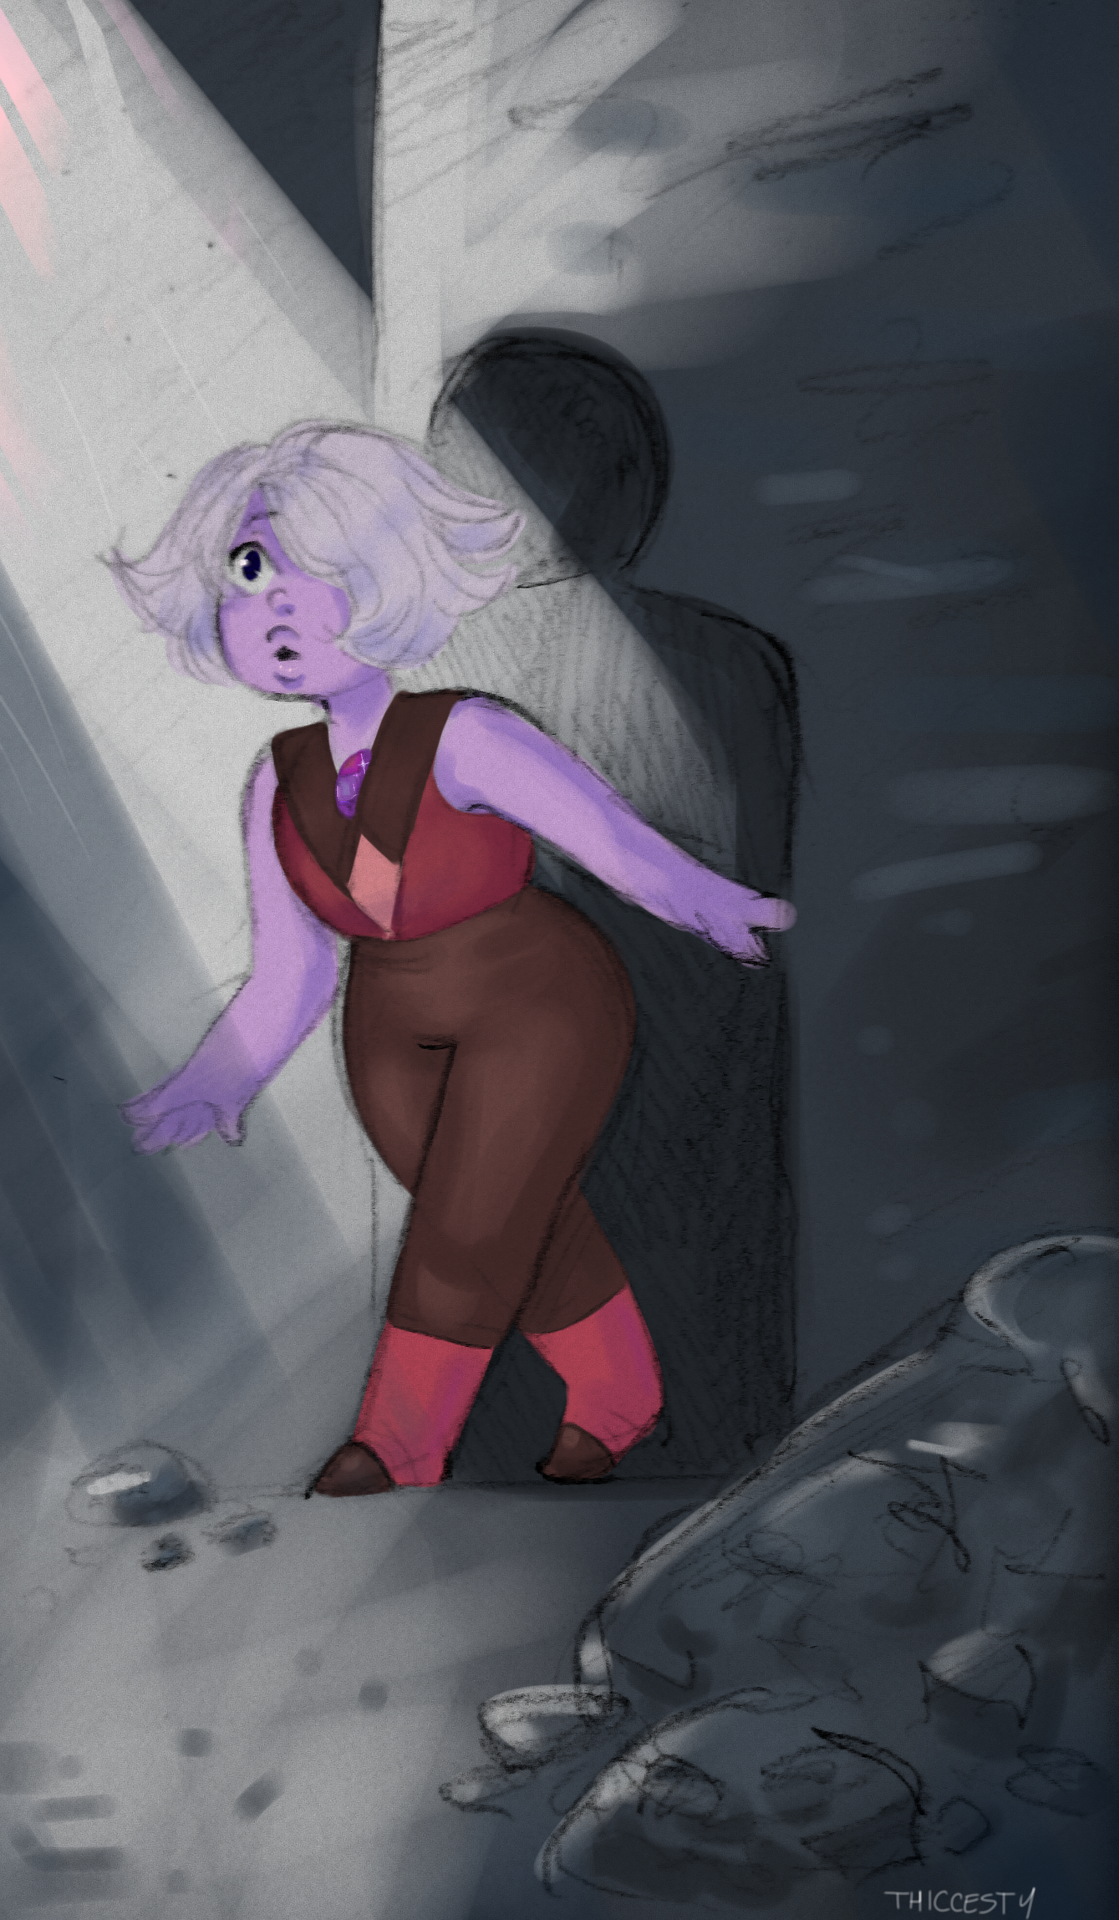 Whenever I think of Amethyst’s birth, I imagine her like this 💕